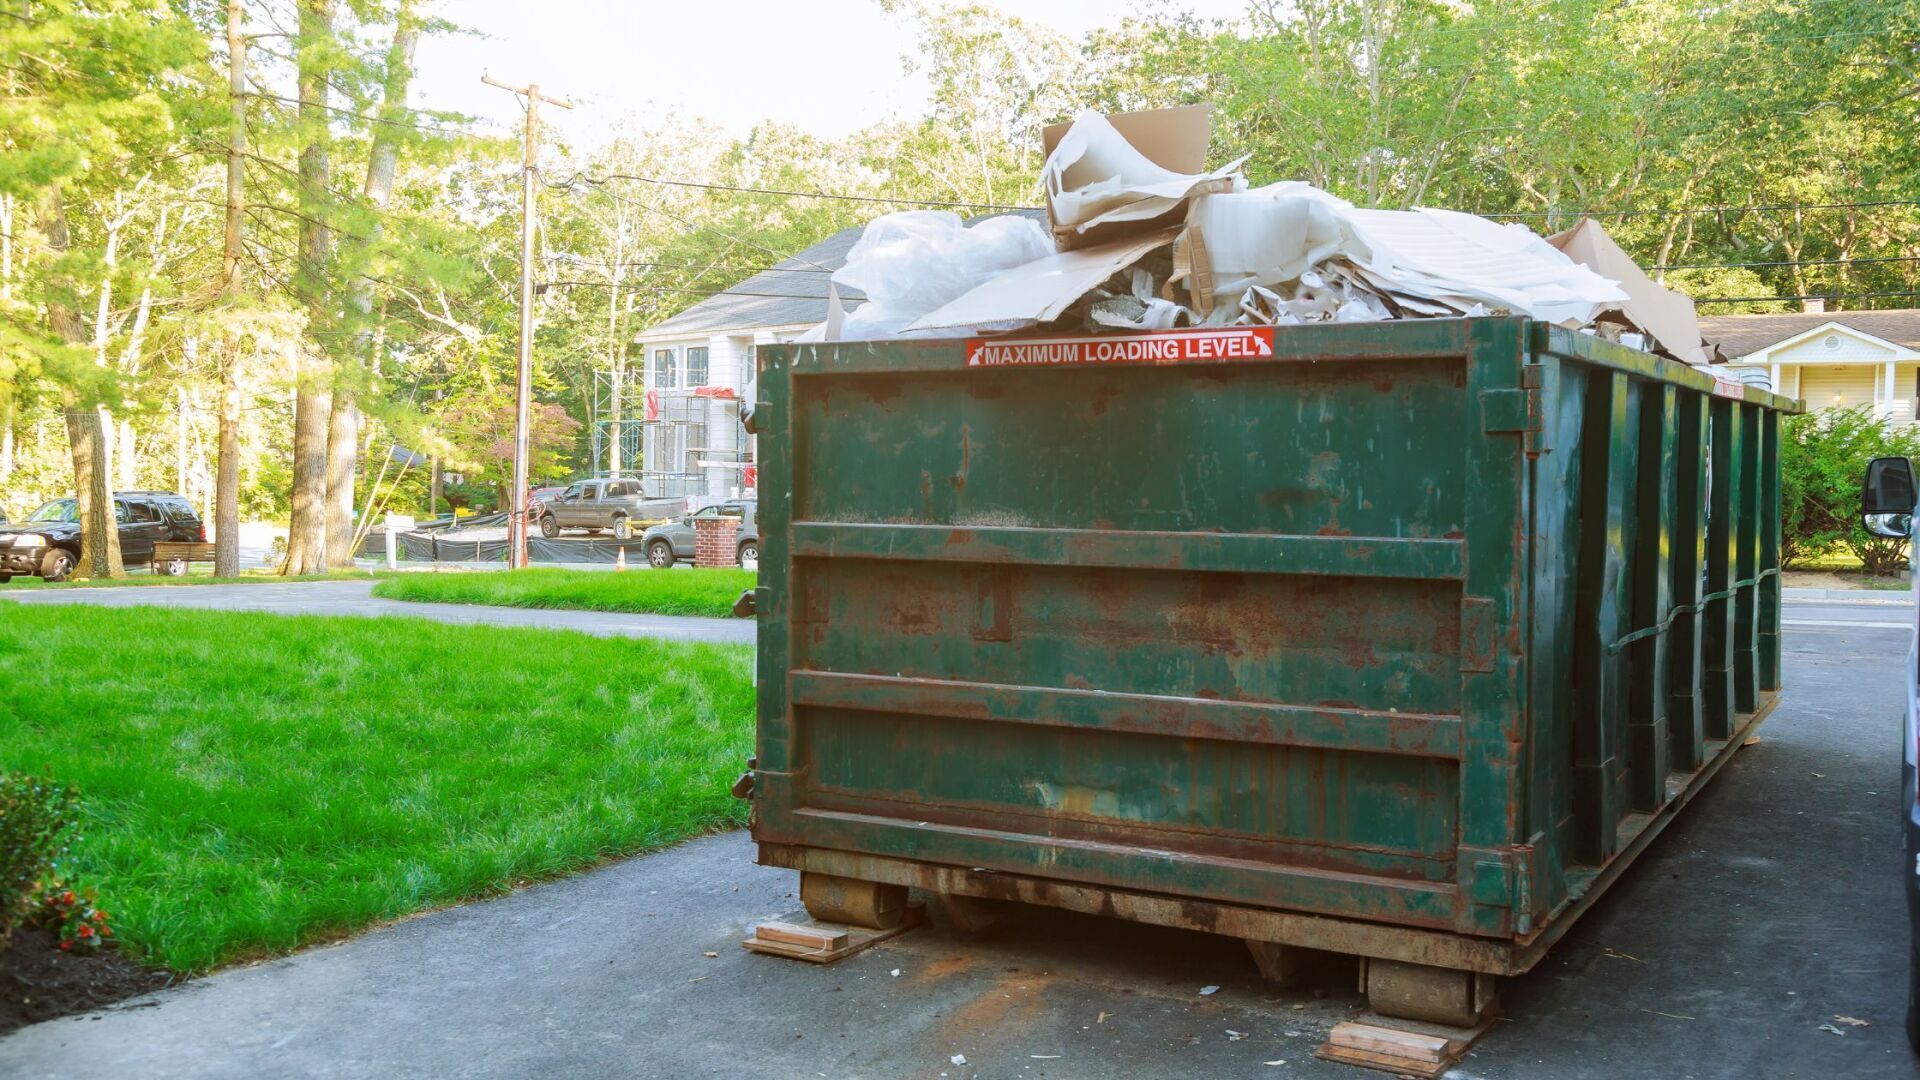 Renting a Dumpster for Construction Sites